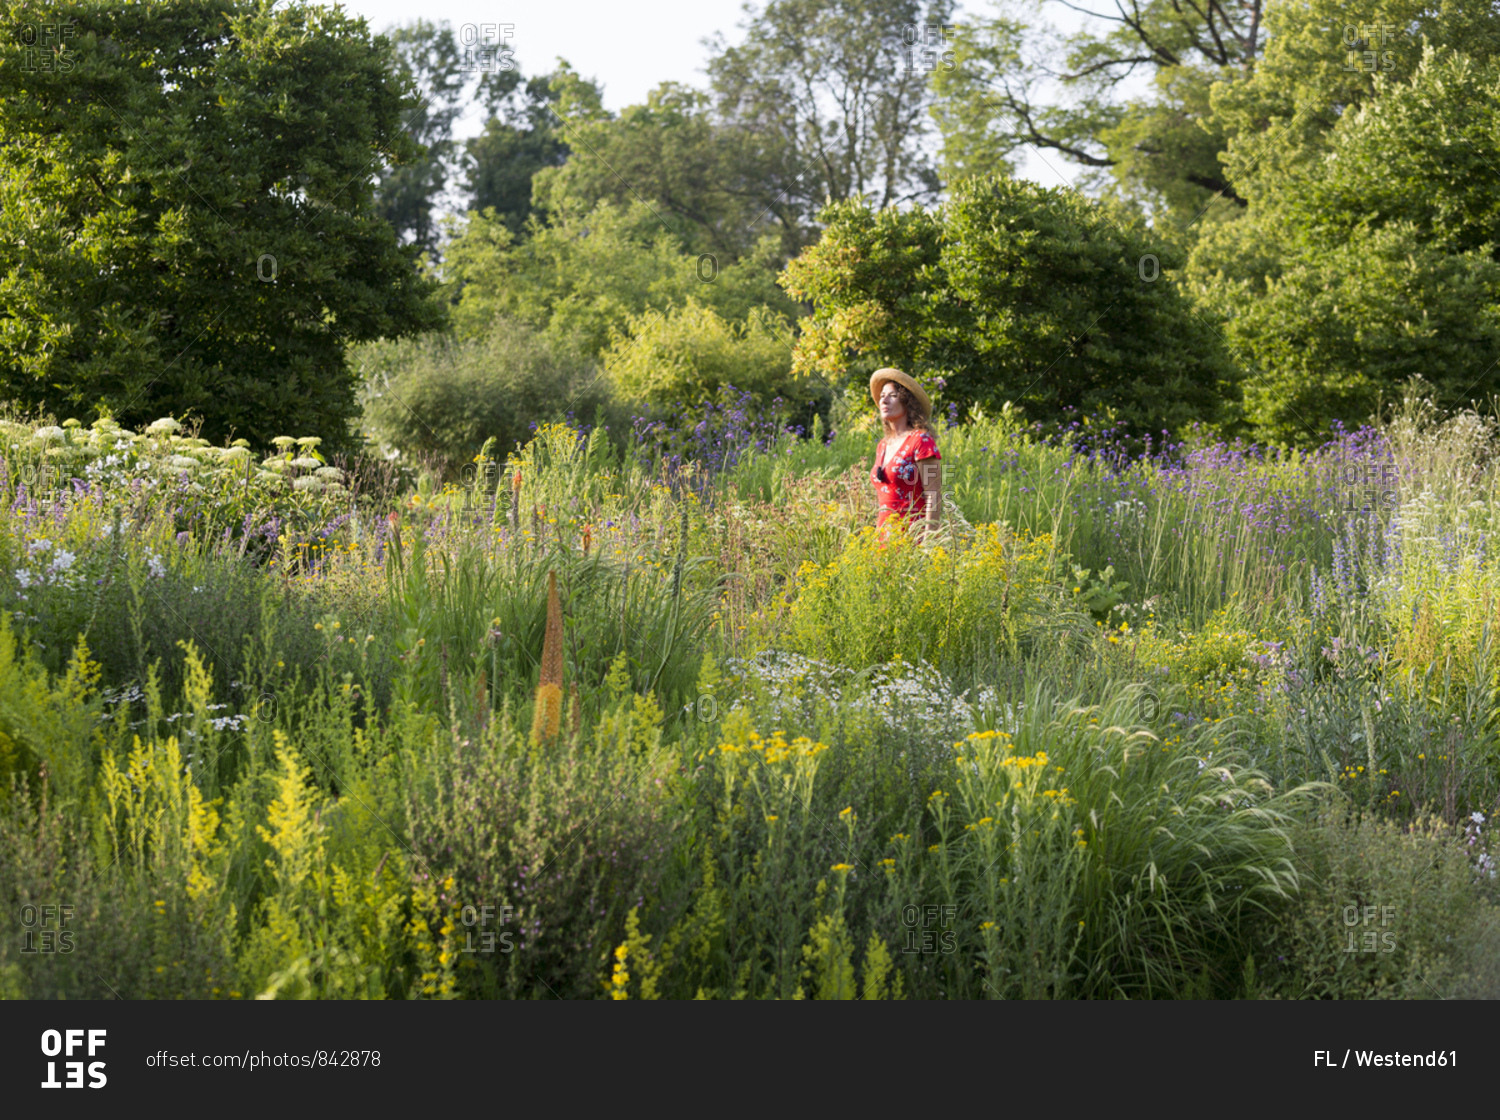 Woman wearing straw hat and red summer dress in garden with wildflowers